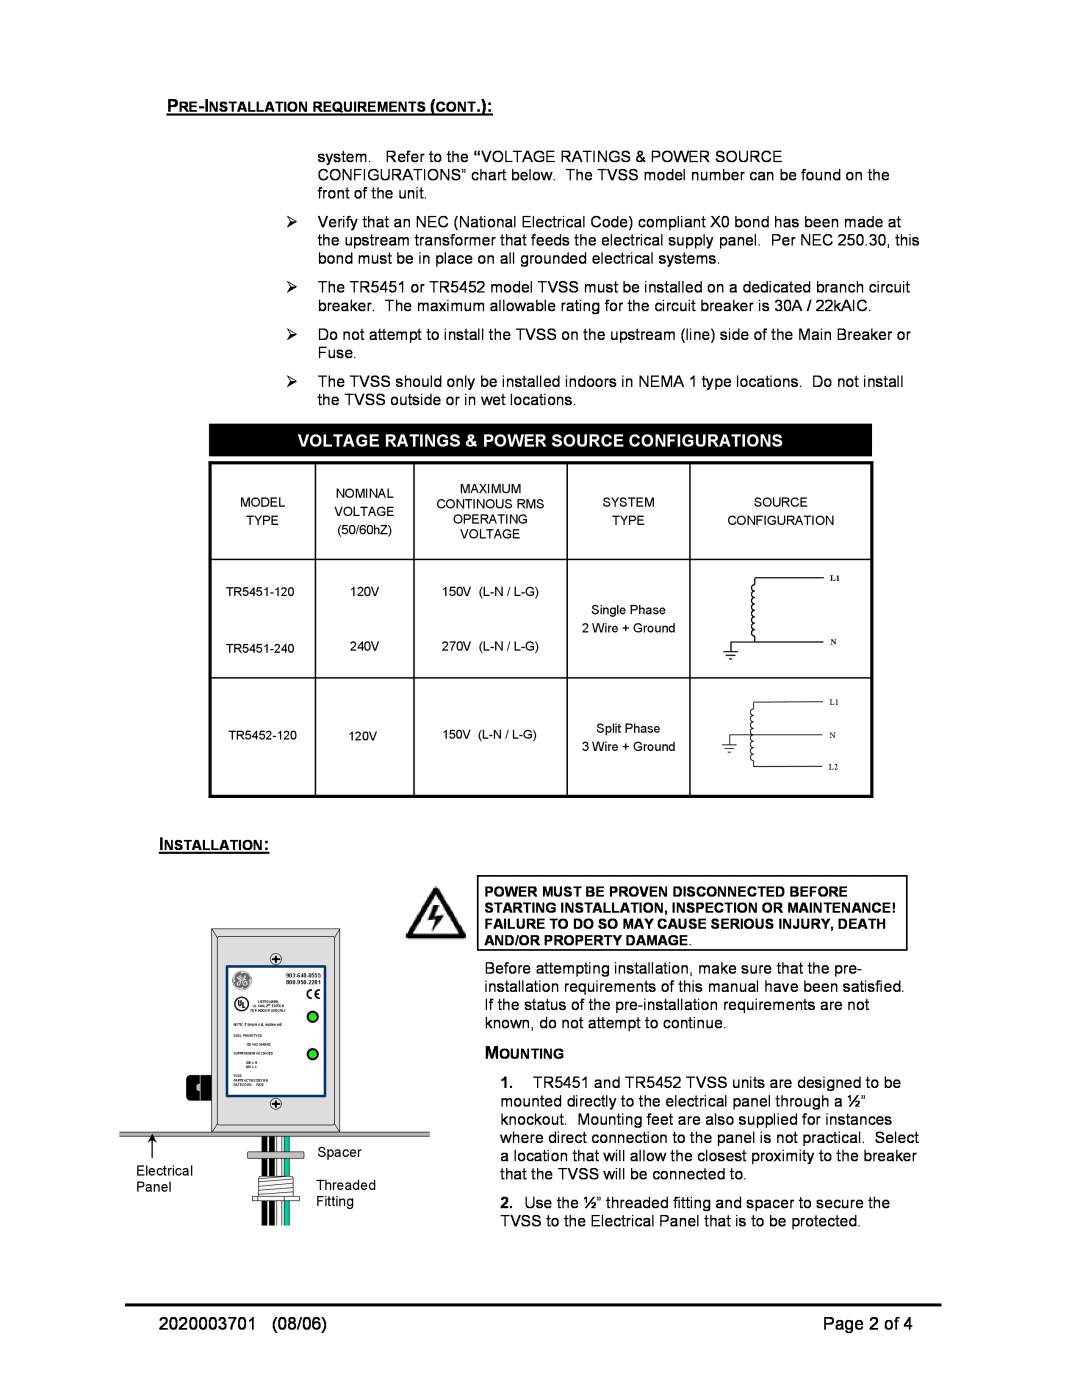 GE TR5451, TR5452 operation manual 2020003701, 08/06, Page 2 of, Voltage Ratings & Power Source Configurations 